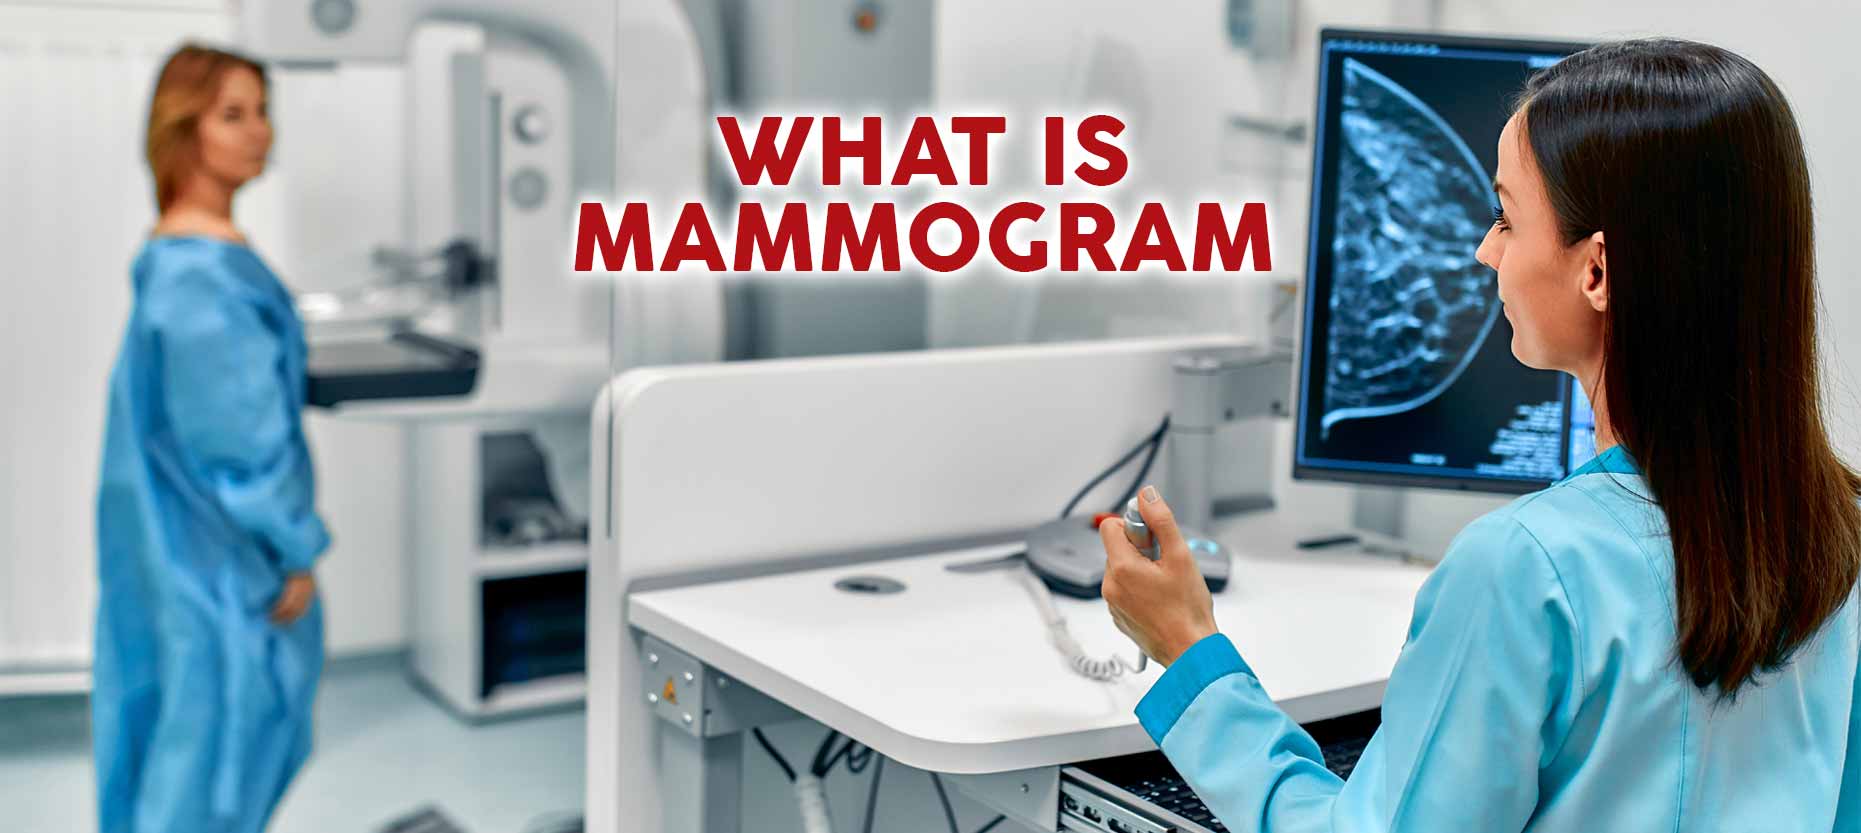 What is Mammogram?